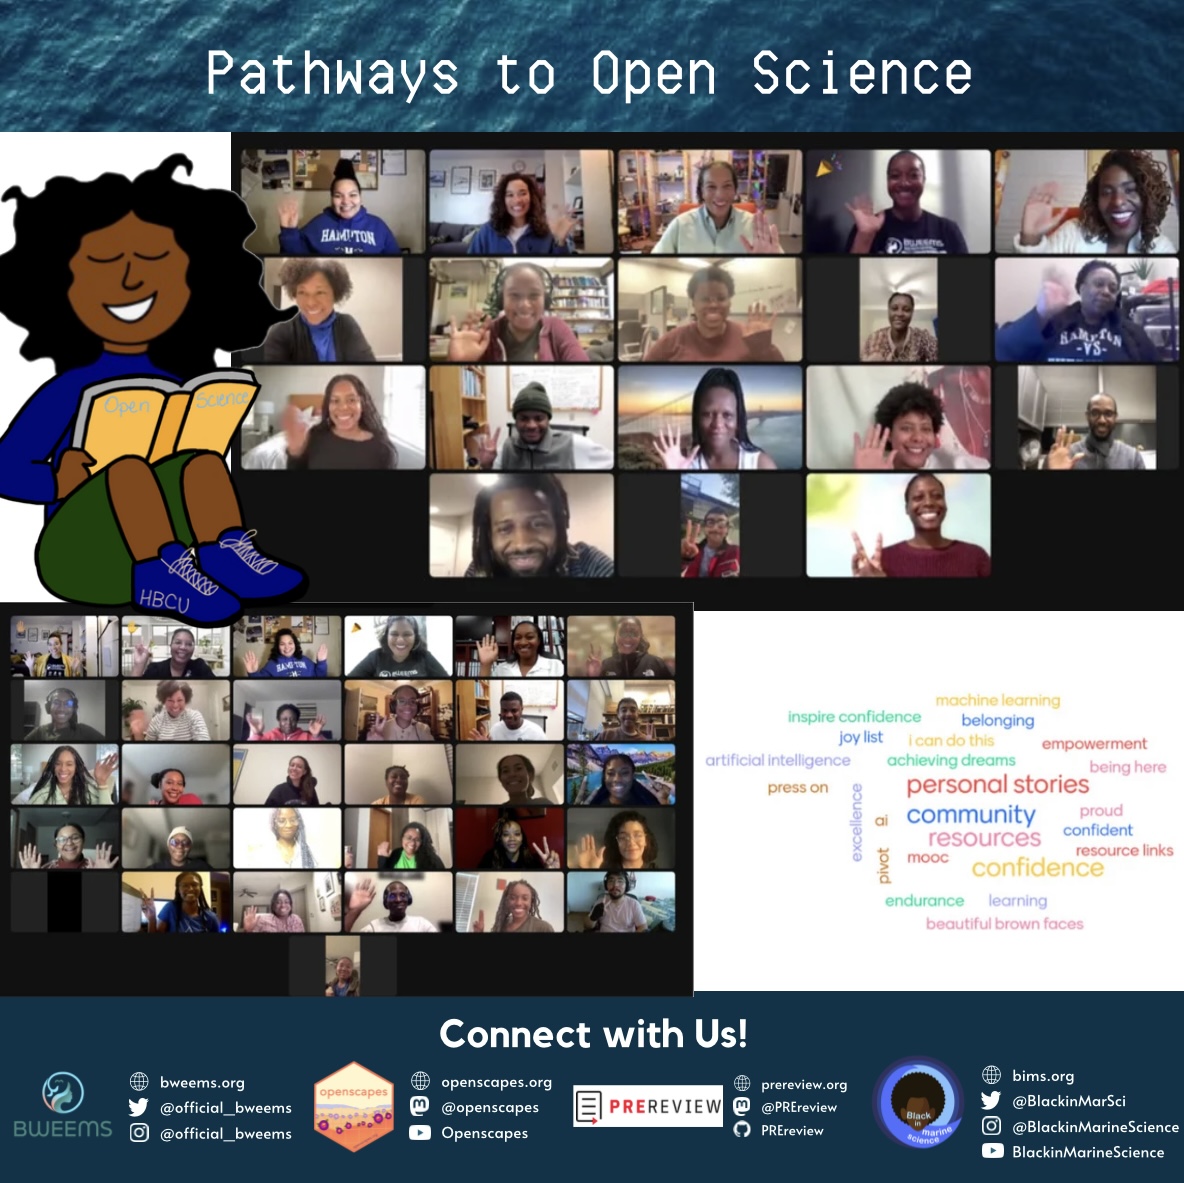 2 zoom selfies of 48 Black people smiling and waving, a cartoon of a Black woman sitting, smiling, reading a book called Open Science, and a word cloud with community, personal stories, resources, as largest font words